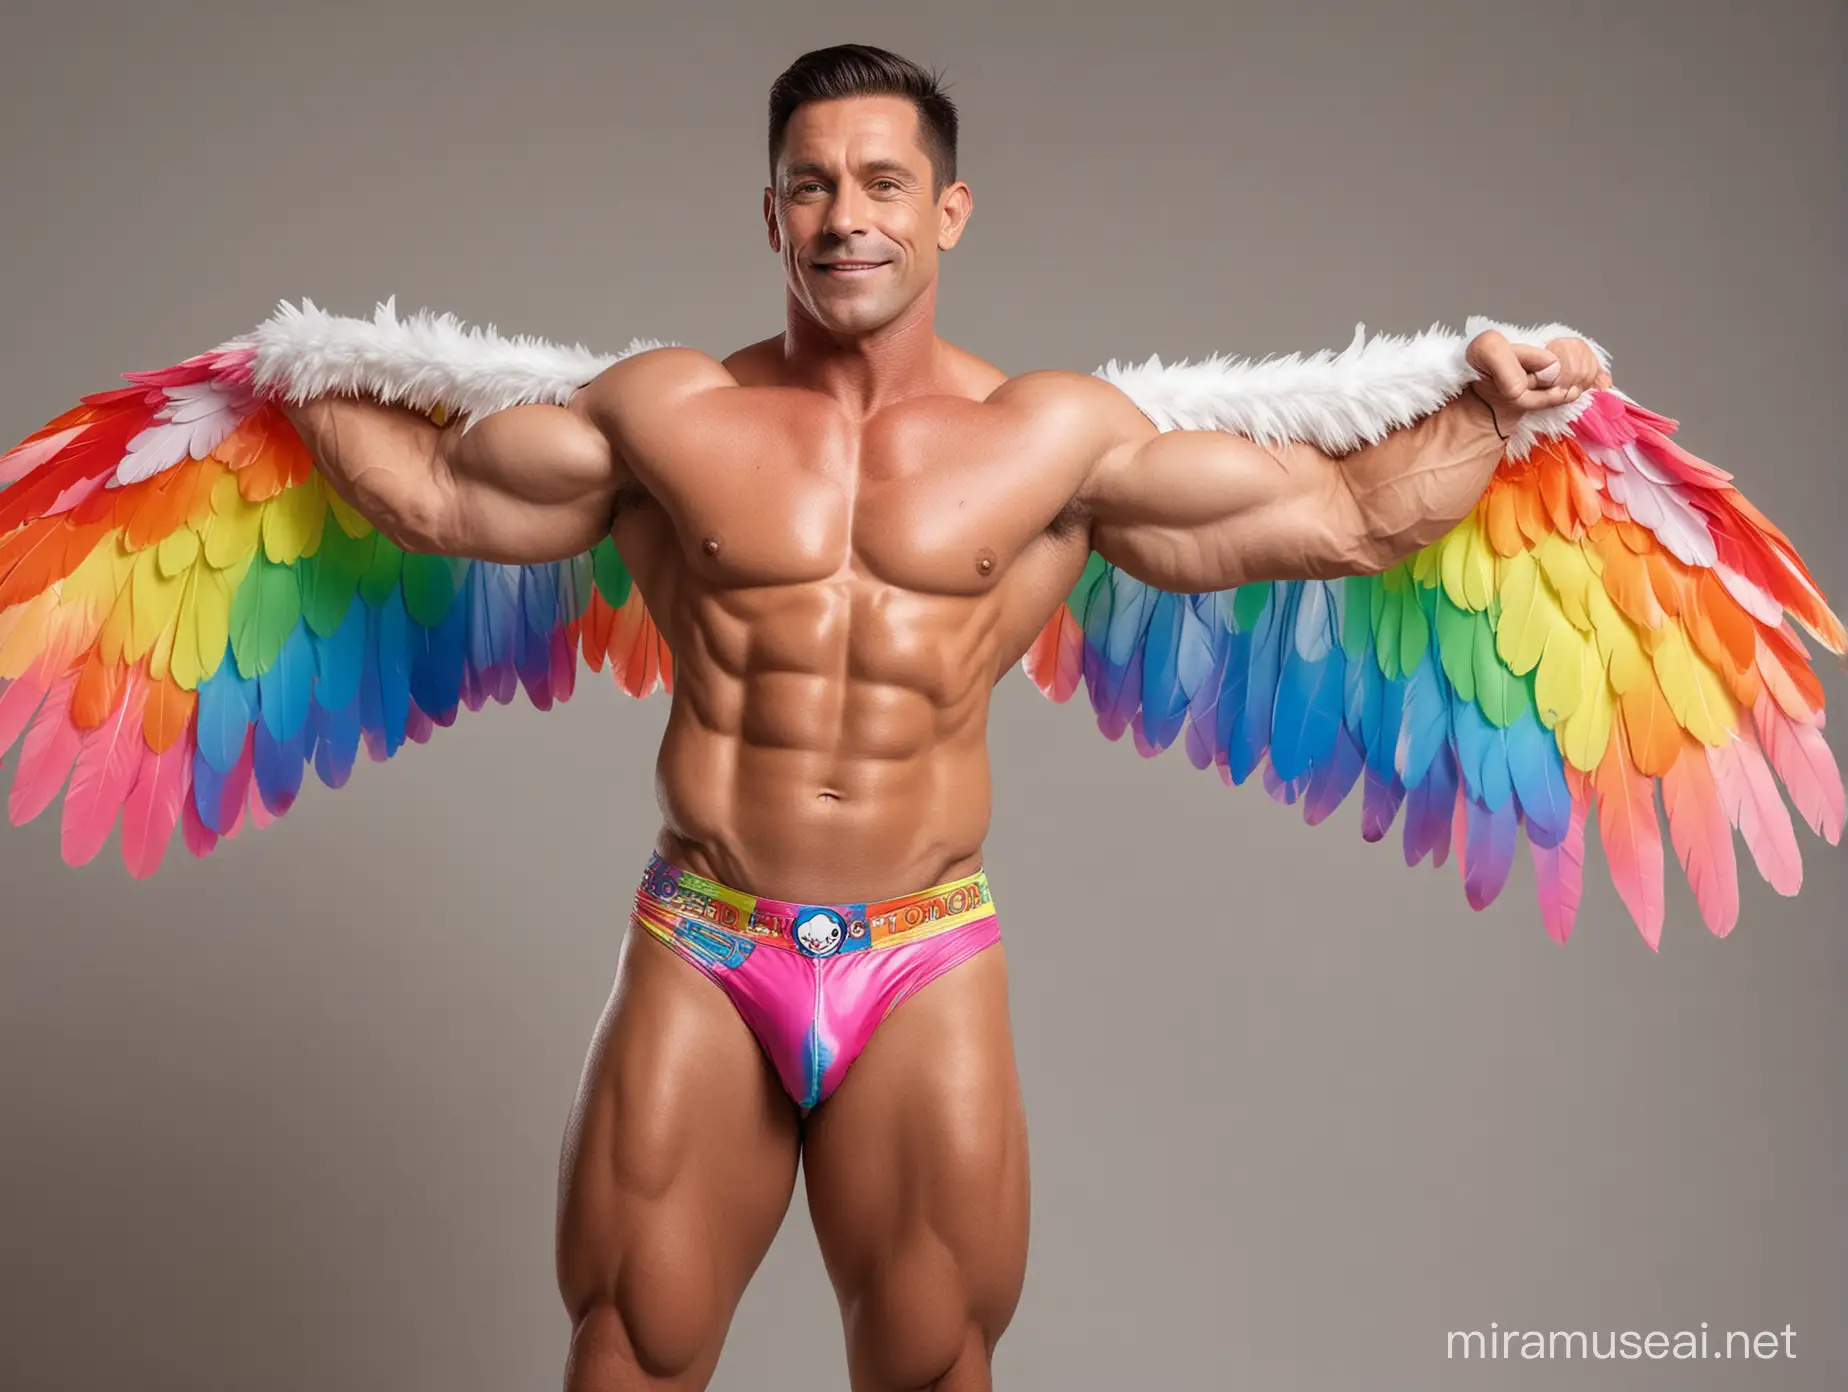 Beefy Bodybuilder Flexing in RainbowColored SeeThrough Wings Jacket with Doraemon